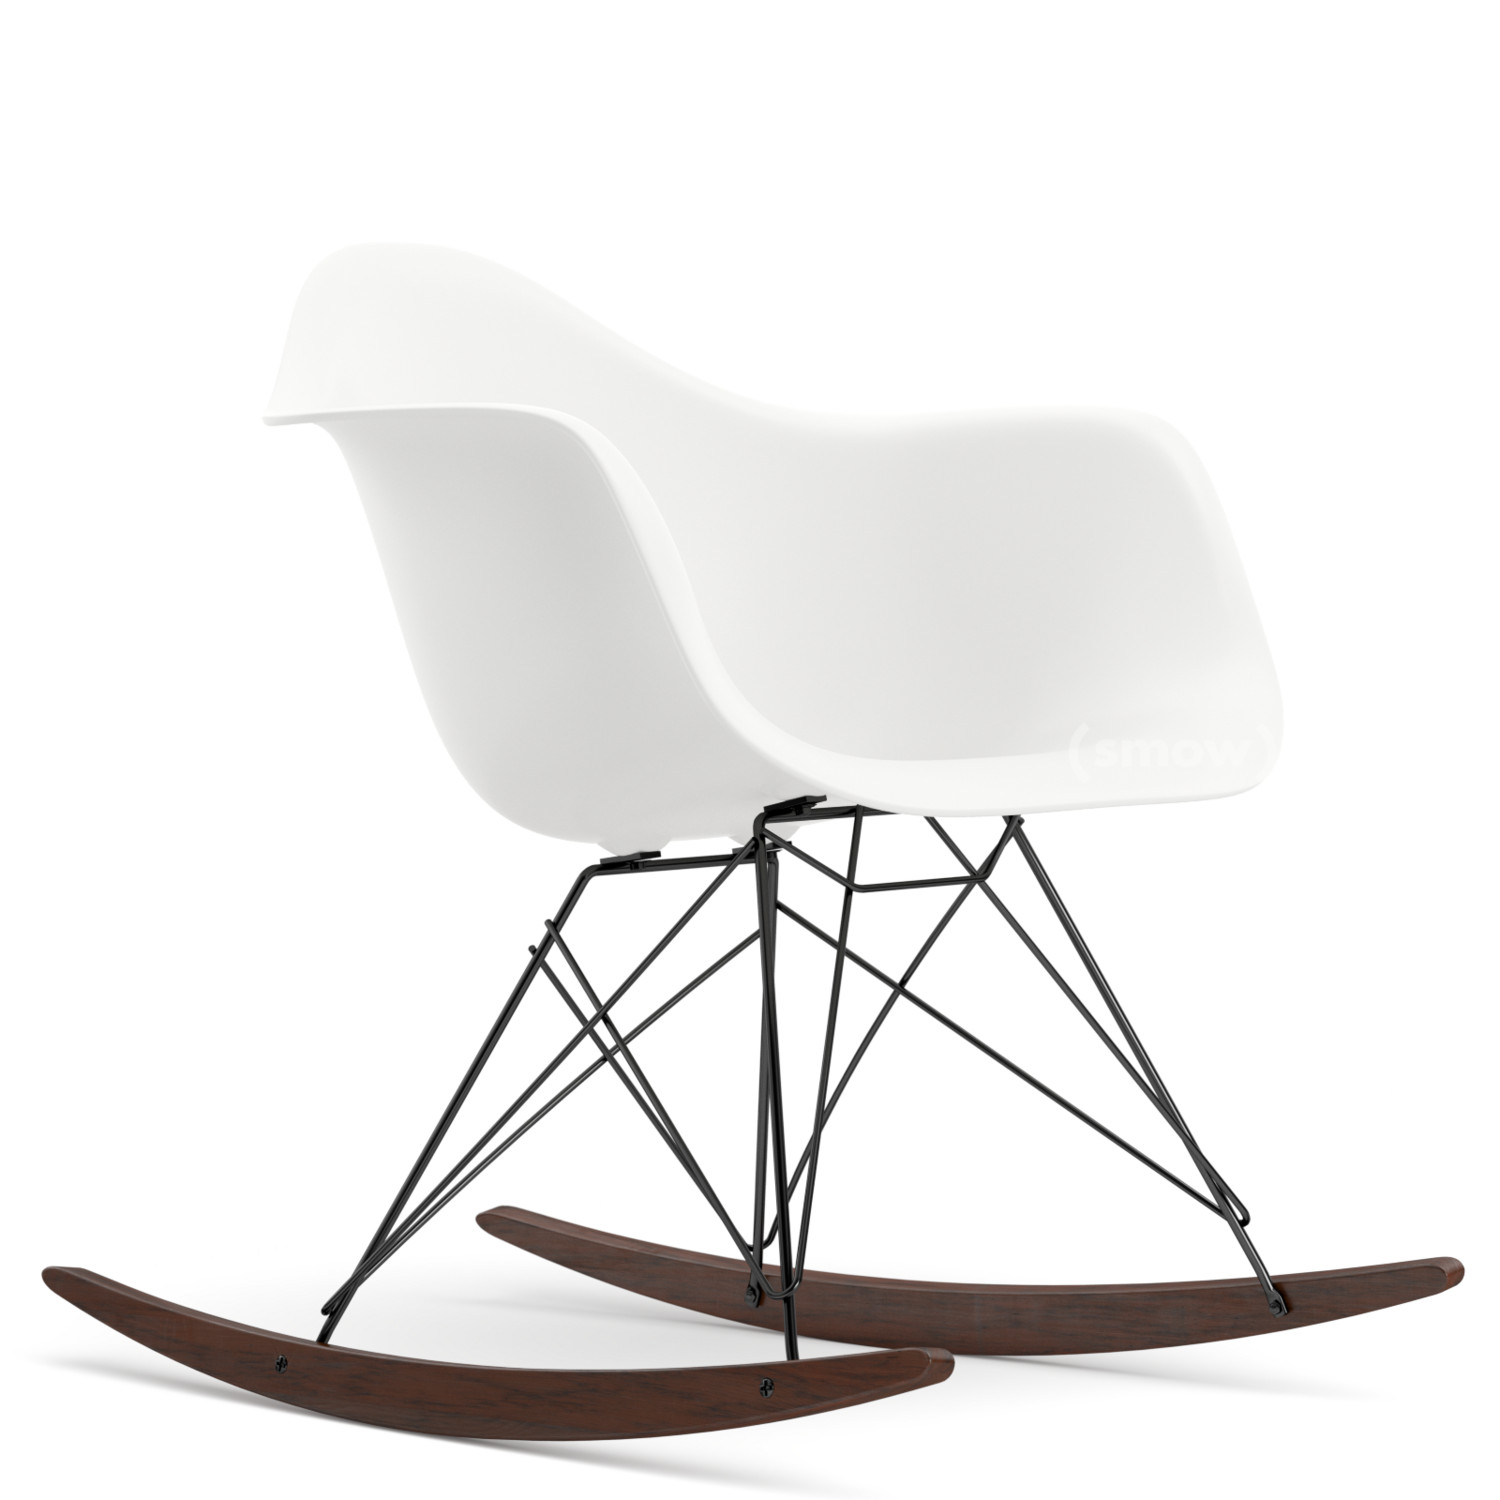 Ineenstorting studie microfoon Vitra Eames Plastic Armchair RAR by Charles & Ray Eames, 1950 - Designer  furniture by smow.com